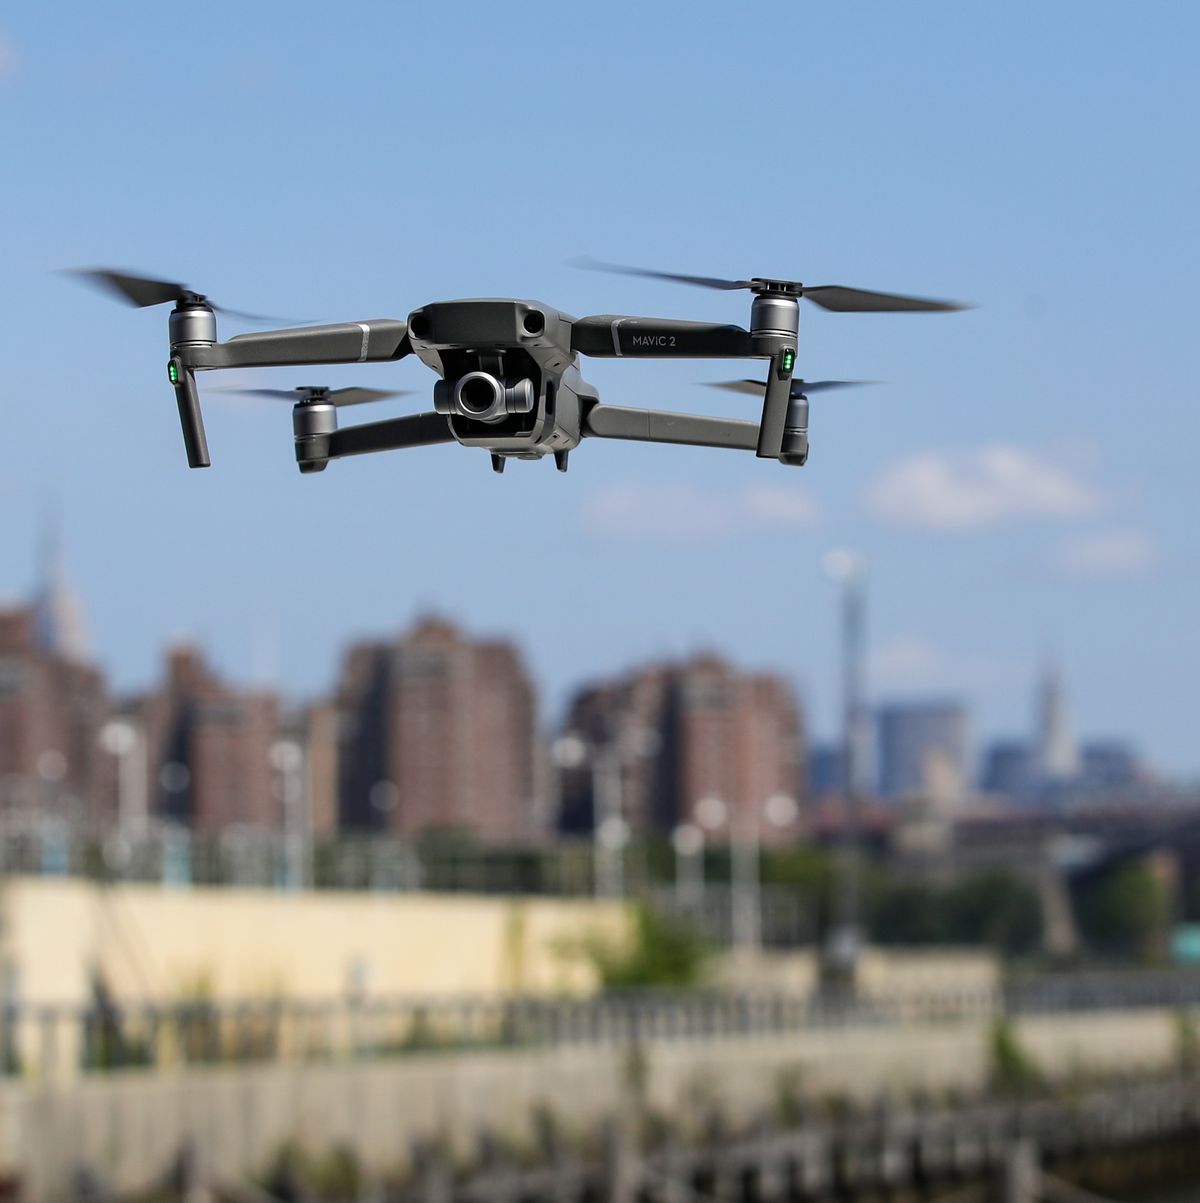 Drone Maker DJI Debuts Latest Product In New York